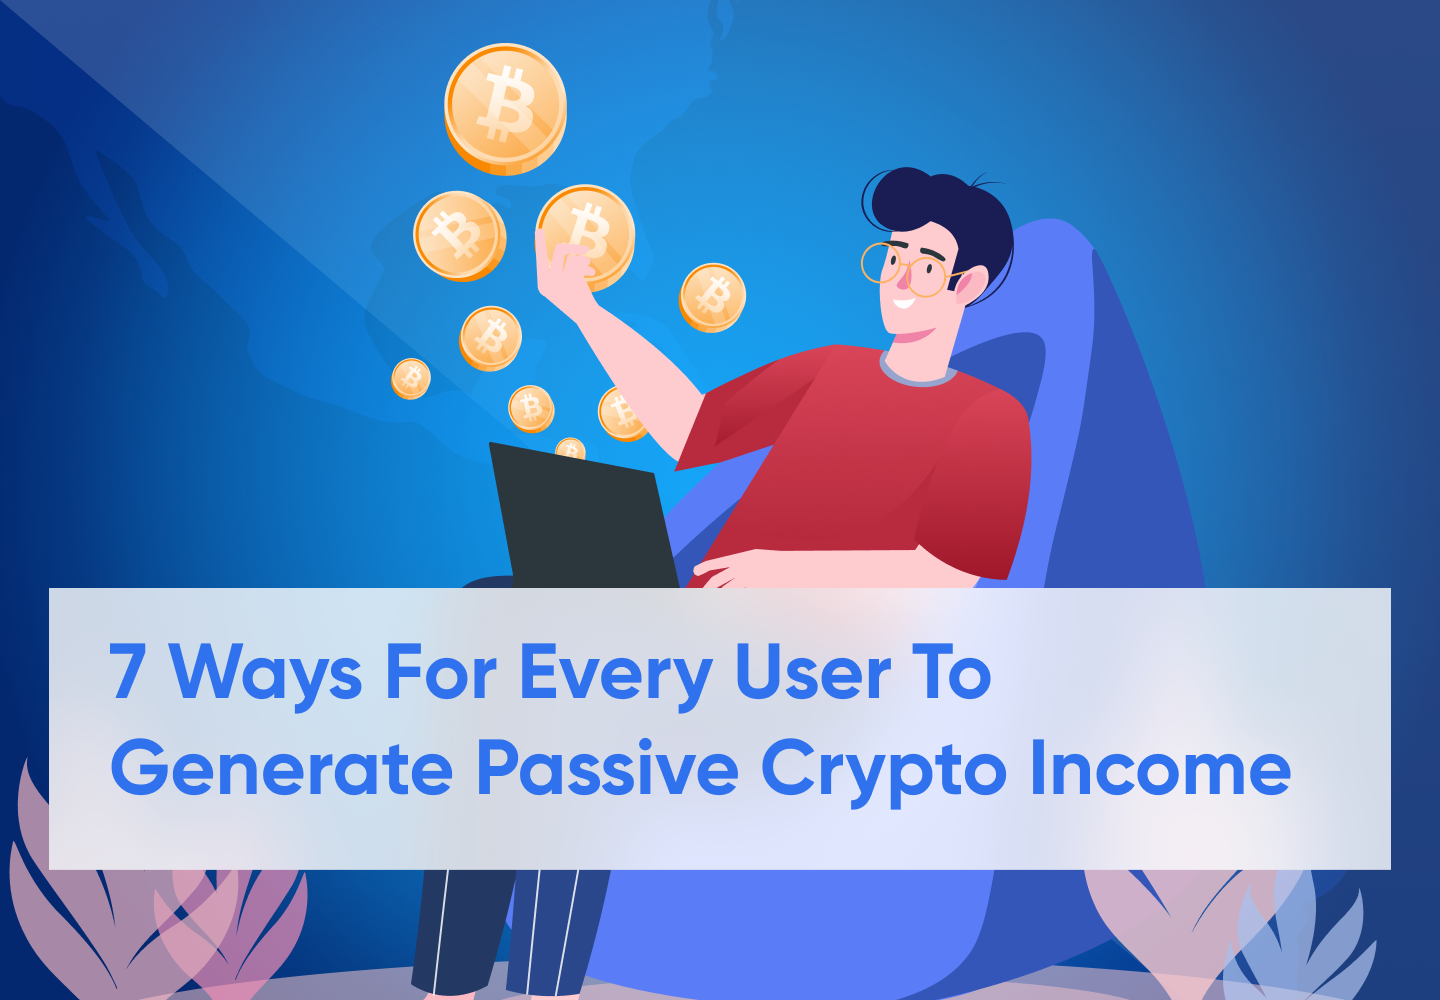 How To Generate Passive Crypto Income In 2022